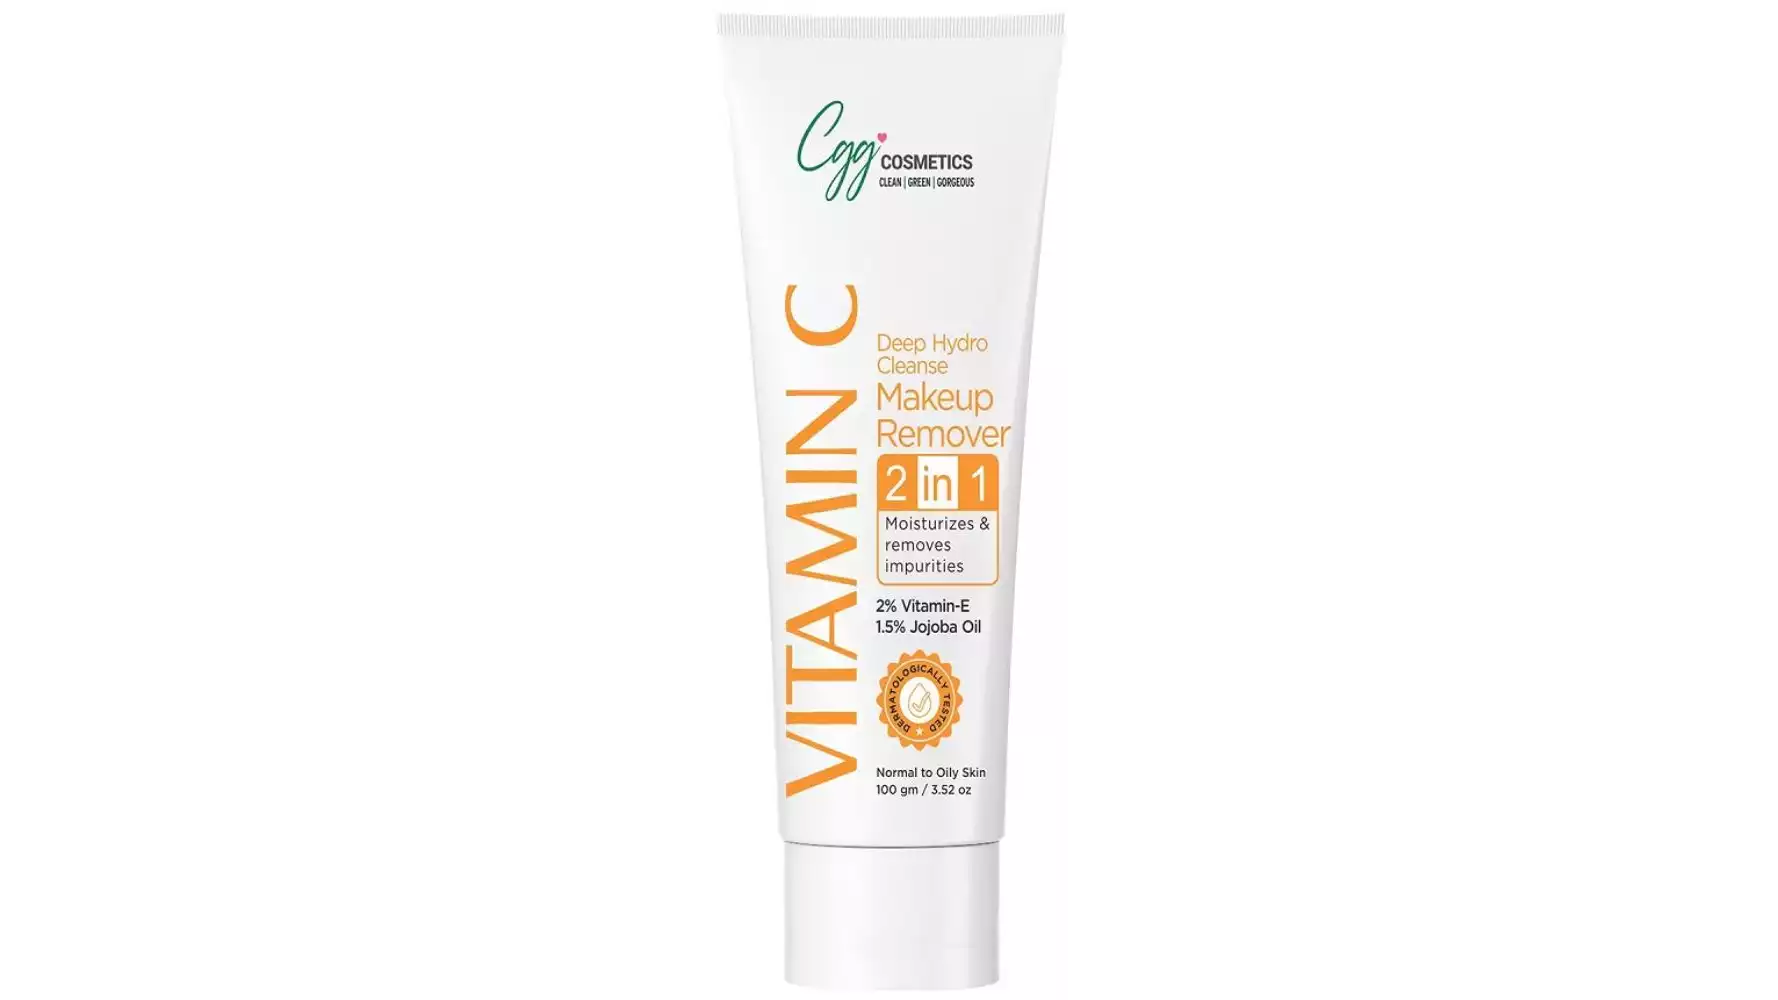 Cgg Cosmetics Vitamin C Deep Hydro Cleanse Makeup Remover (100g)